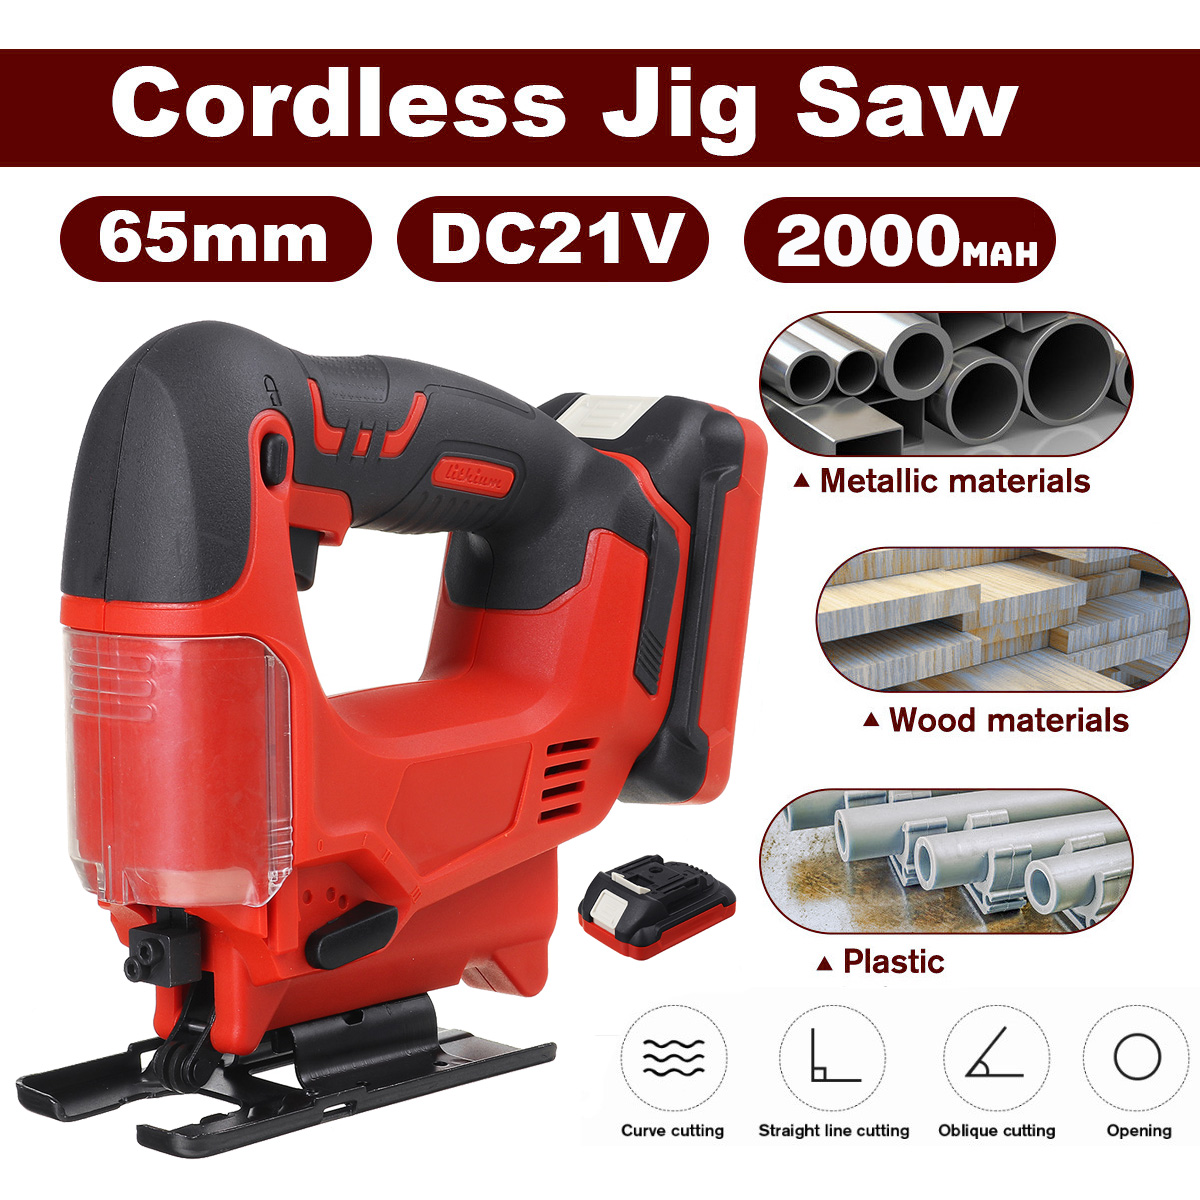 Drillpro-2000mAh-Electric-Saws-Cordless-Jig-Saw-Angle-Adjustble-65mm-Cutting-Depth-With-1-Or-2-Batte-1840189-1